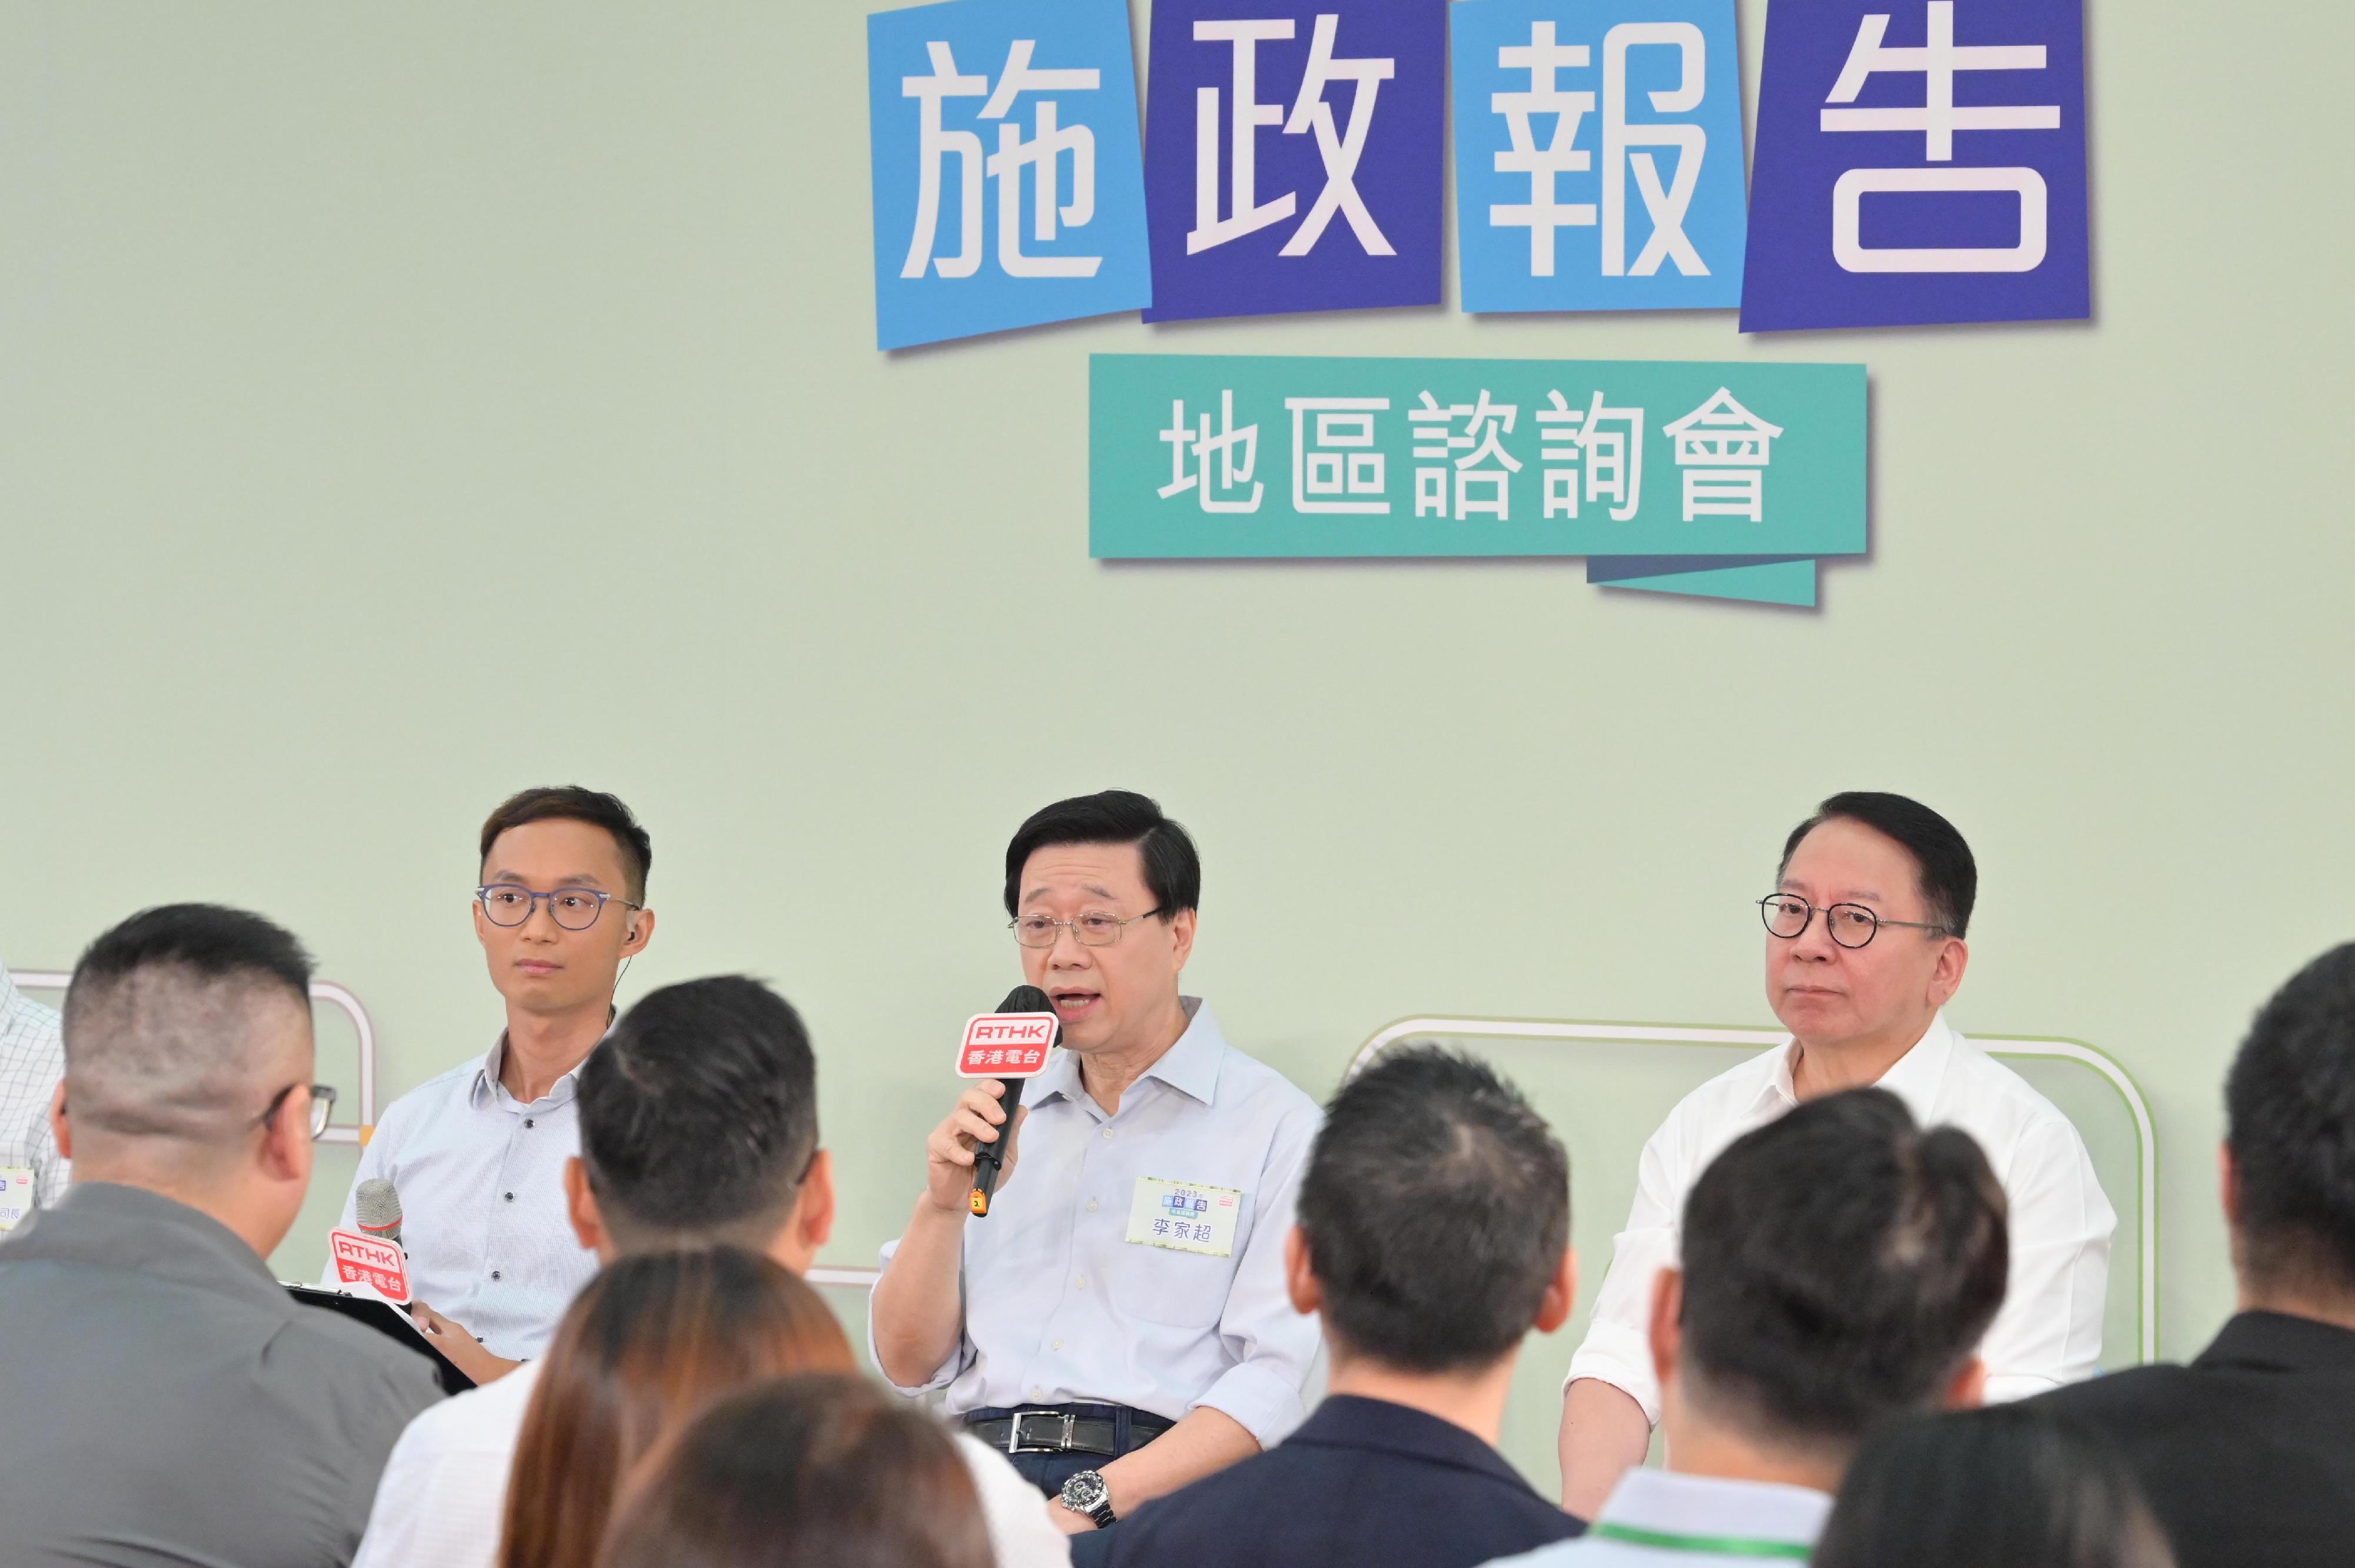 The Chief Executive, Mr John Lee, attended the 2023 Policy Address District Forum with some Principal Officials this morning (August 20) to listen to views and suggestions of local community members on the upcoming Policy Address. Photo shows Mr Lee (centre), and the Chief Secretary for Administration, Mr Chan Kwok-ki (right), listening to views of the public at the consultation session.
